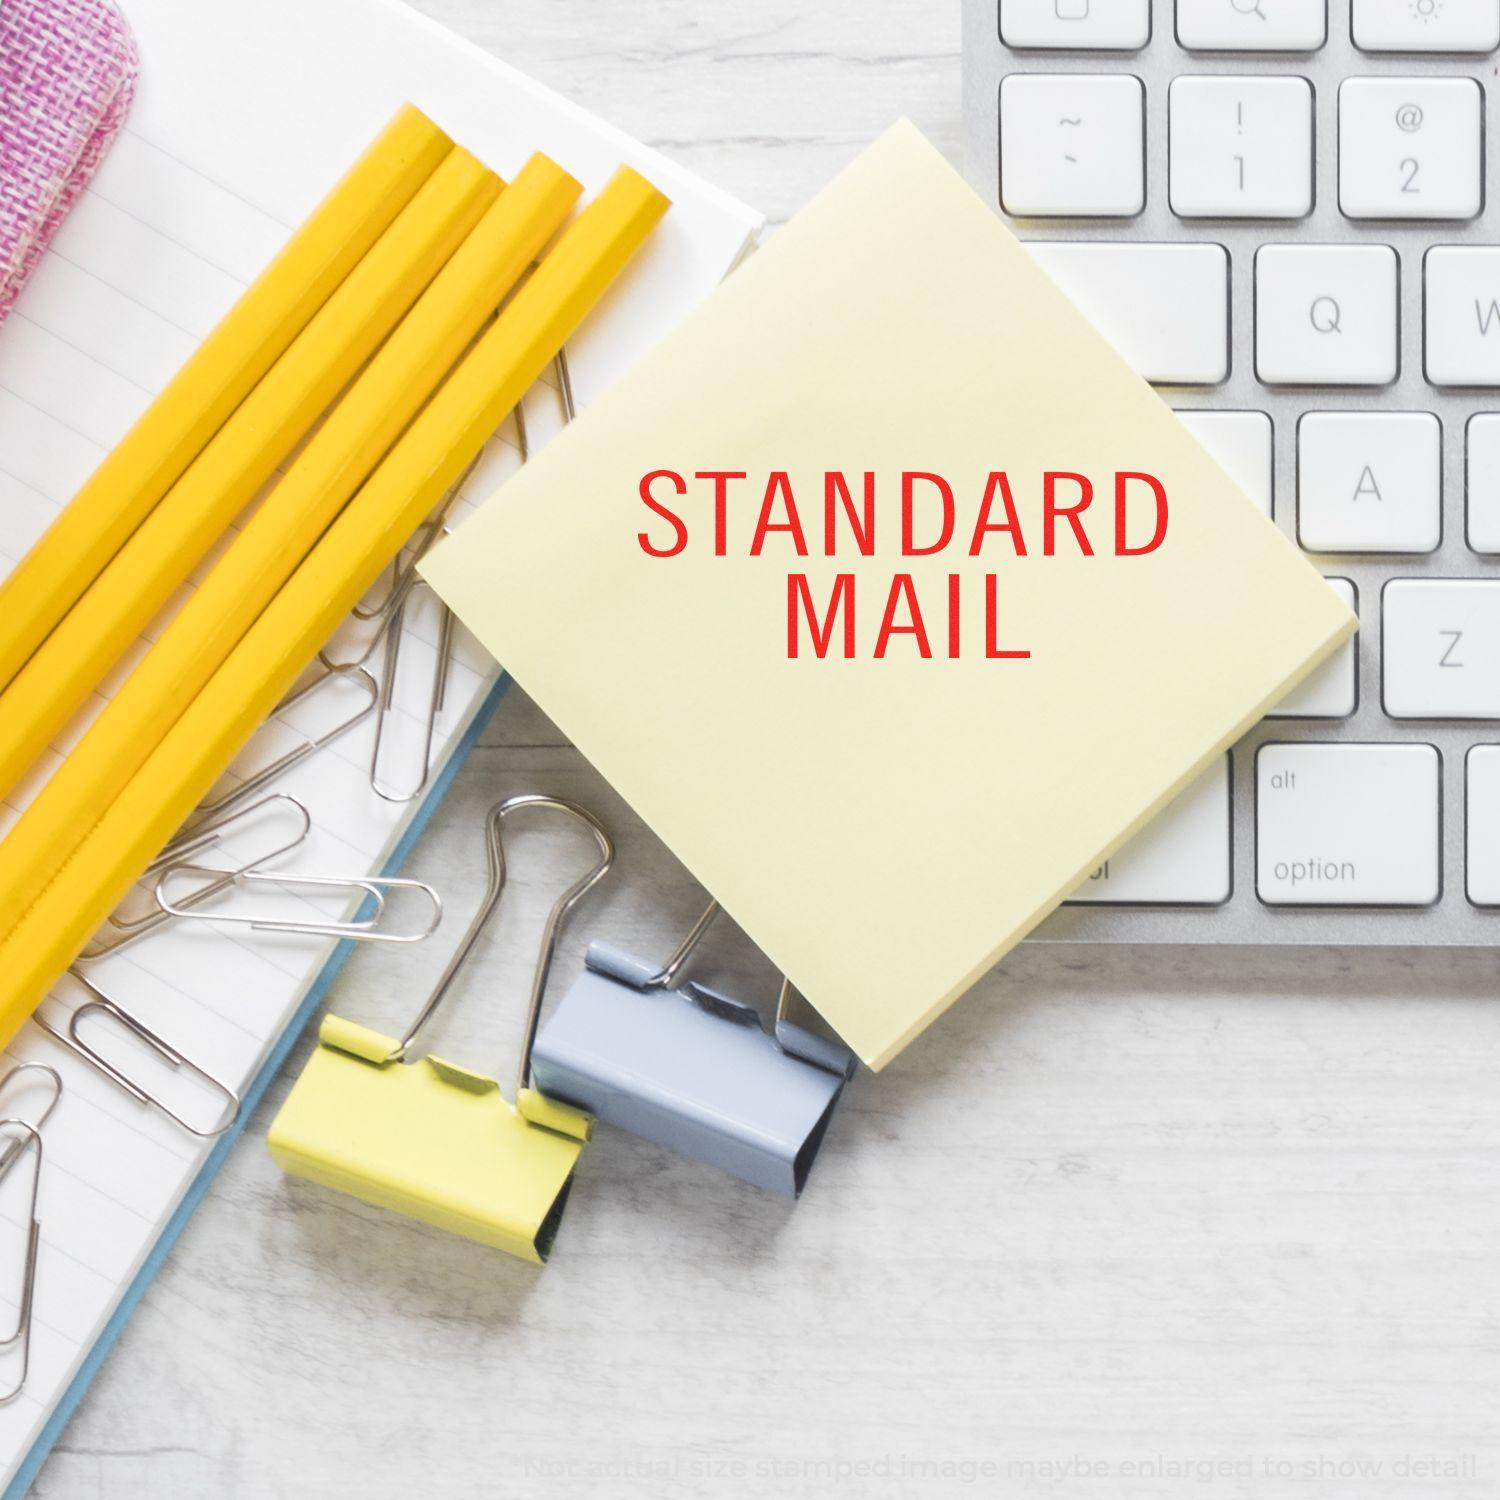 A stock office rubber stamp with a stamped image showing how the text "STANDARD MAIL" in a large font and in a stacked style is displayed after stamping.